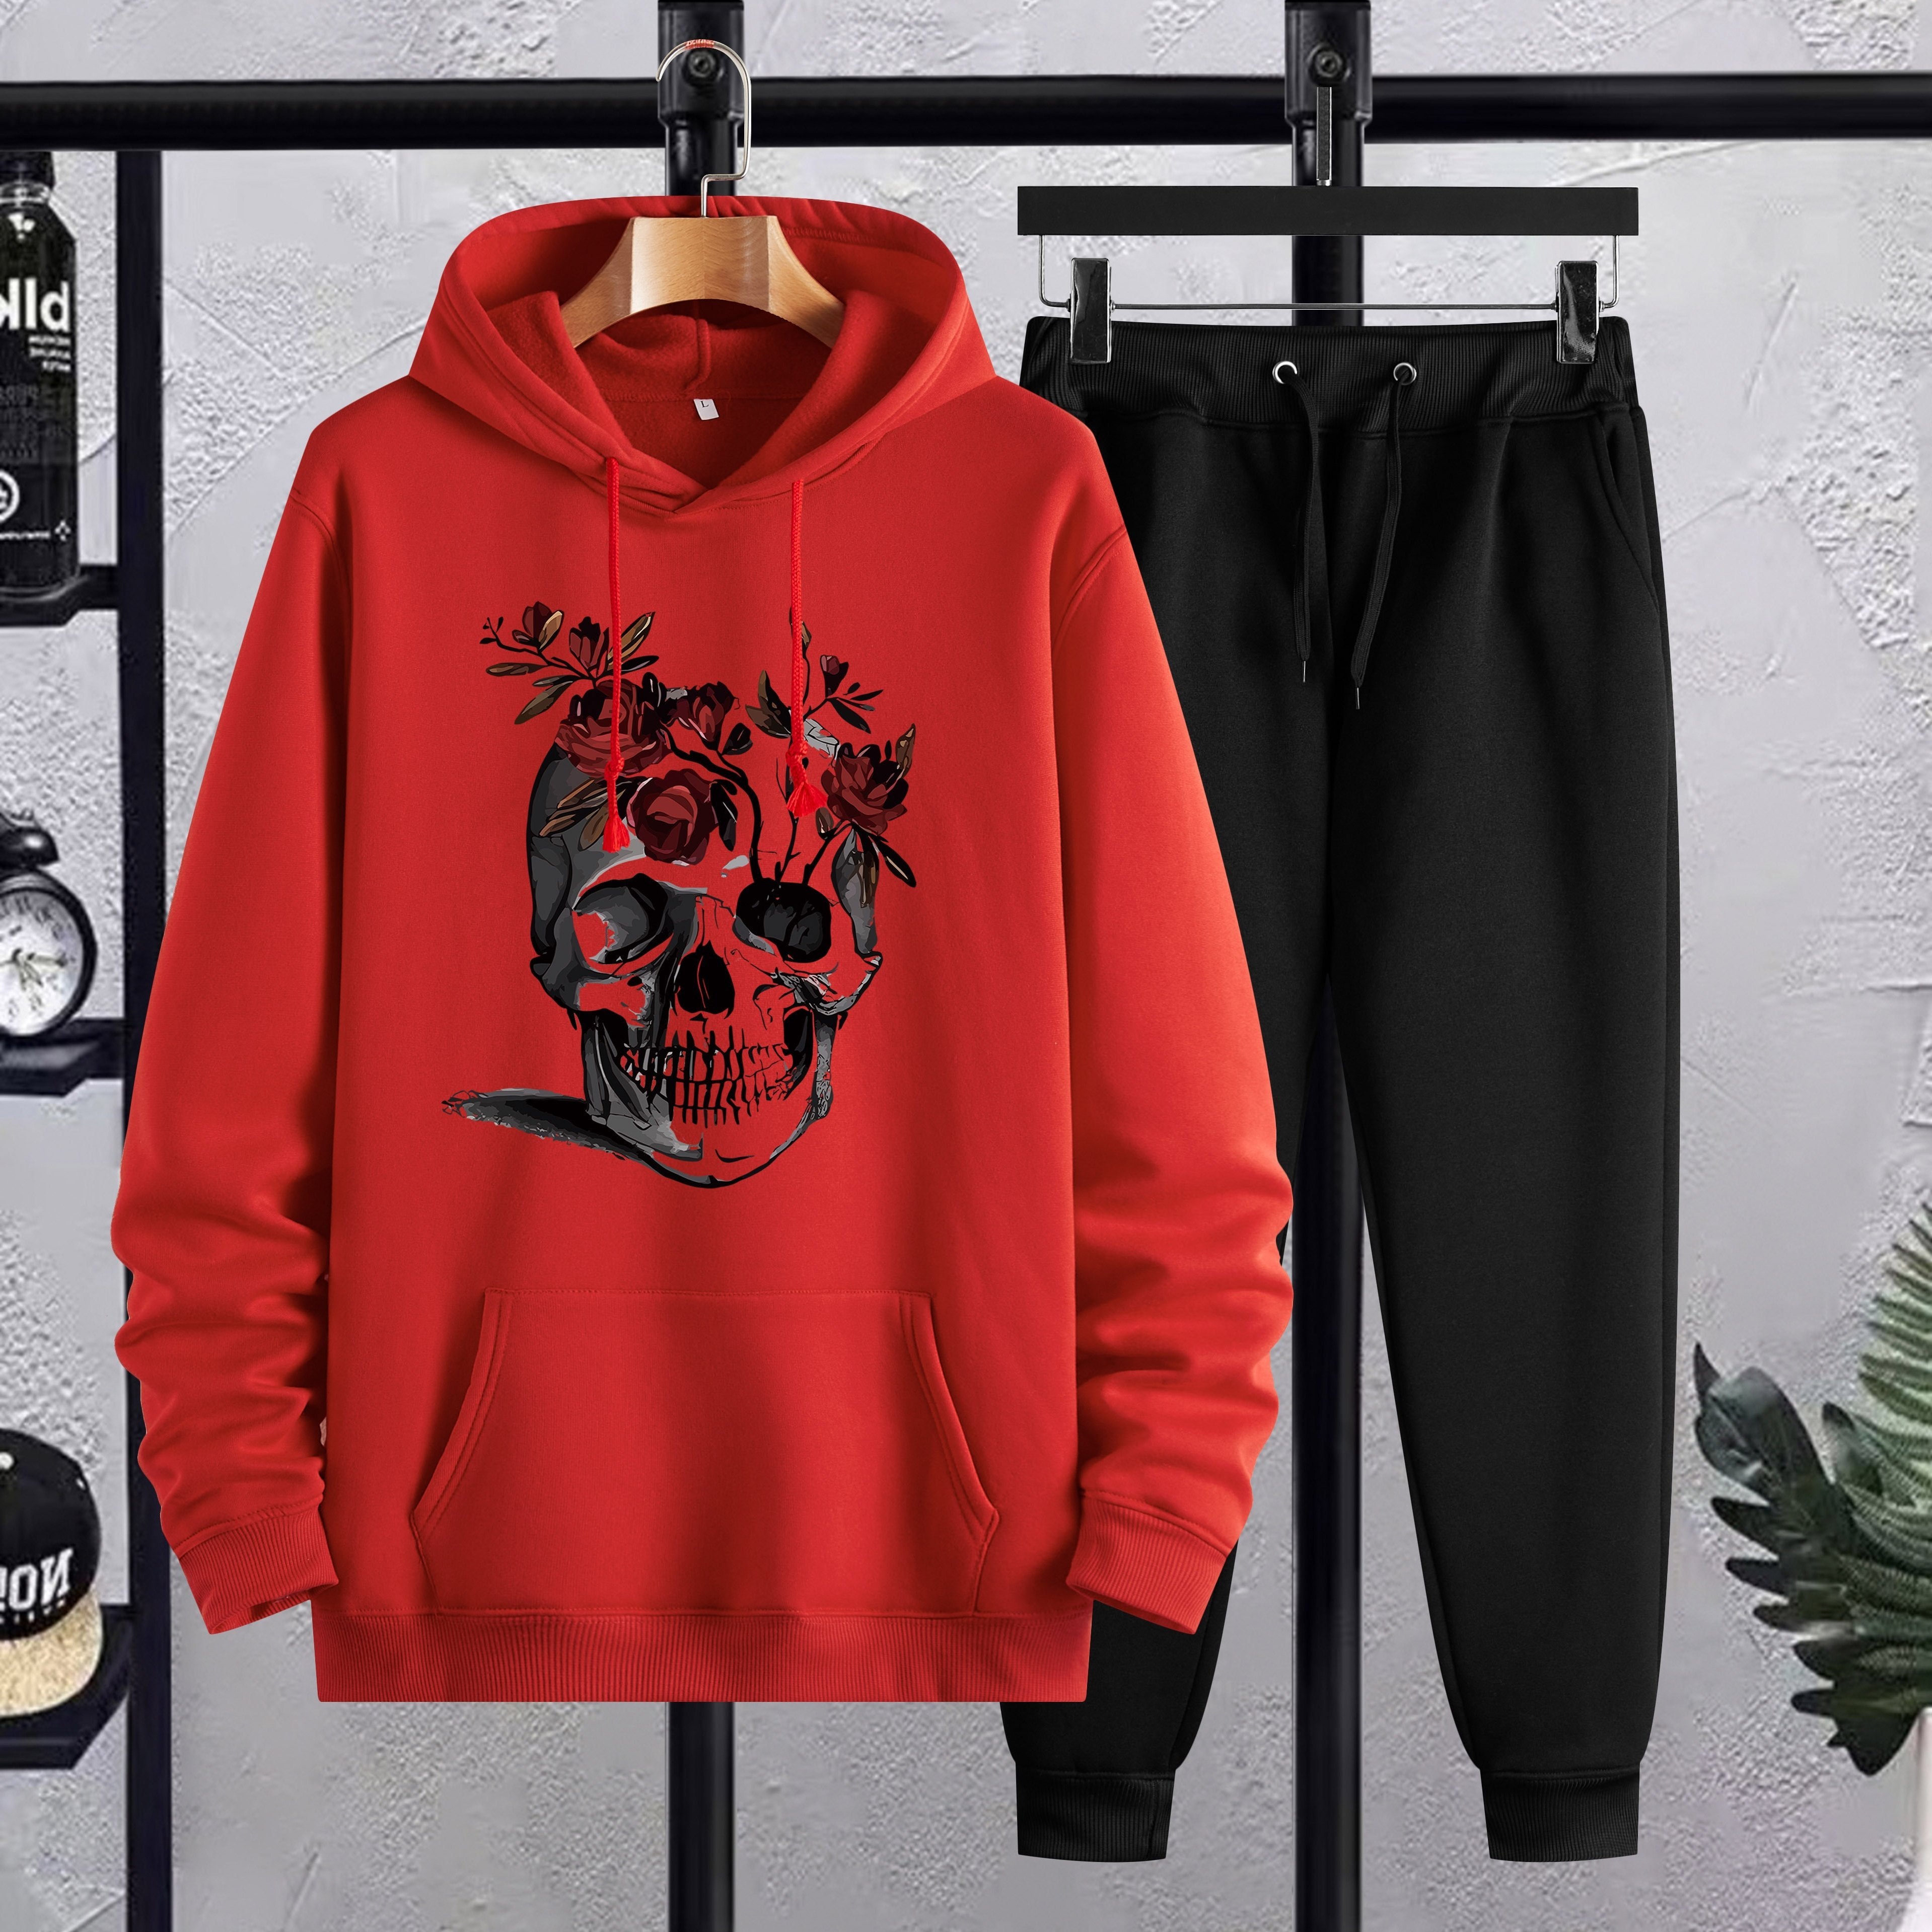 

Skull & Rose Print Men's 2 Pieces Outfits, Men's Drawstring Pocket Hoodie And Sports Trousers, Men's Casual Wear For Spring And Autumn